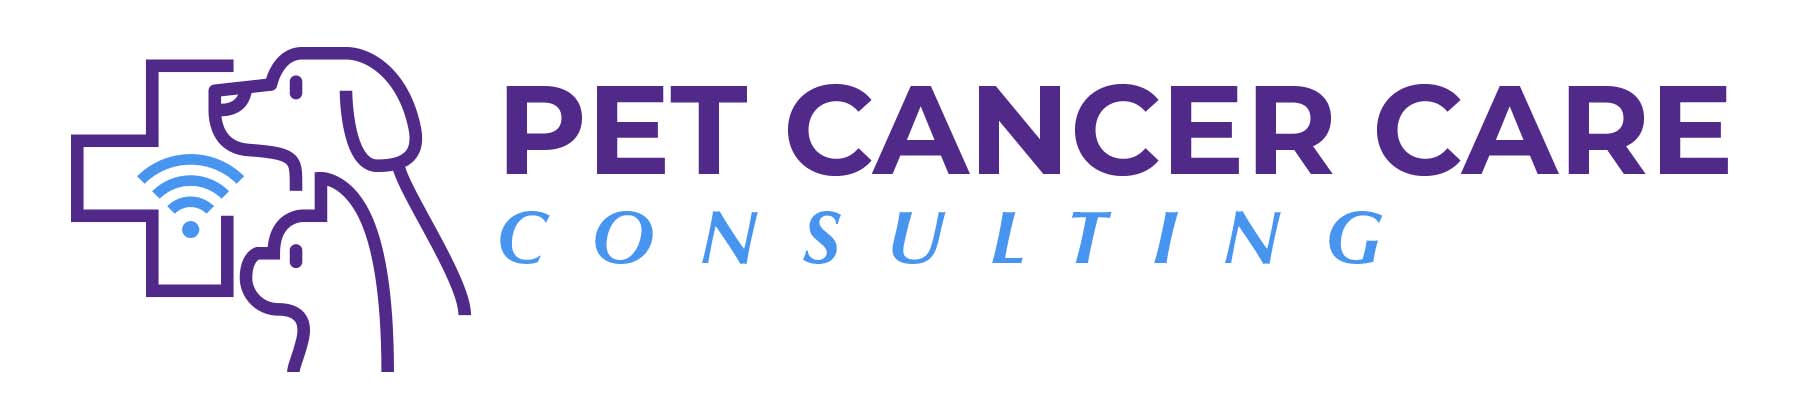 Pet Cancer Care Consulting